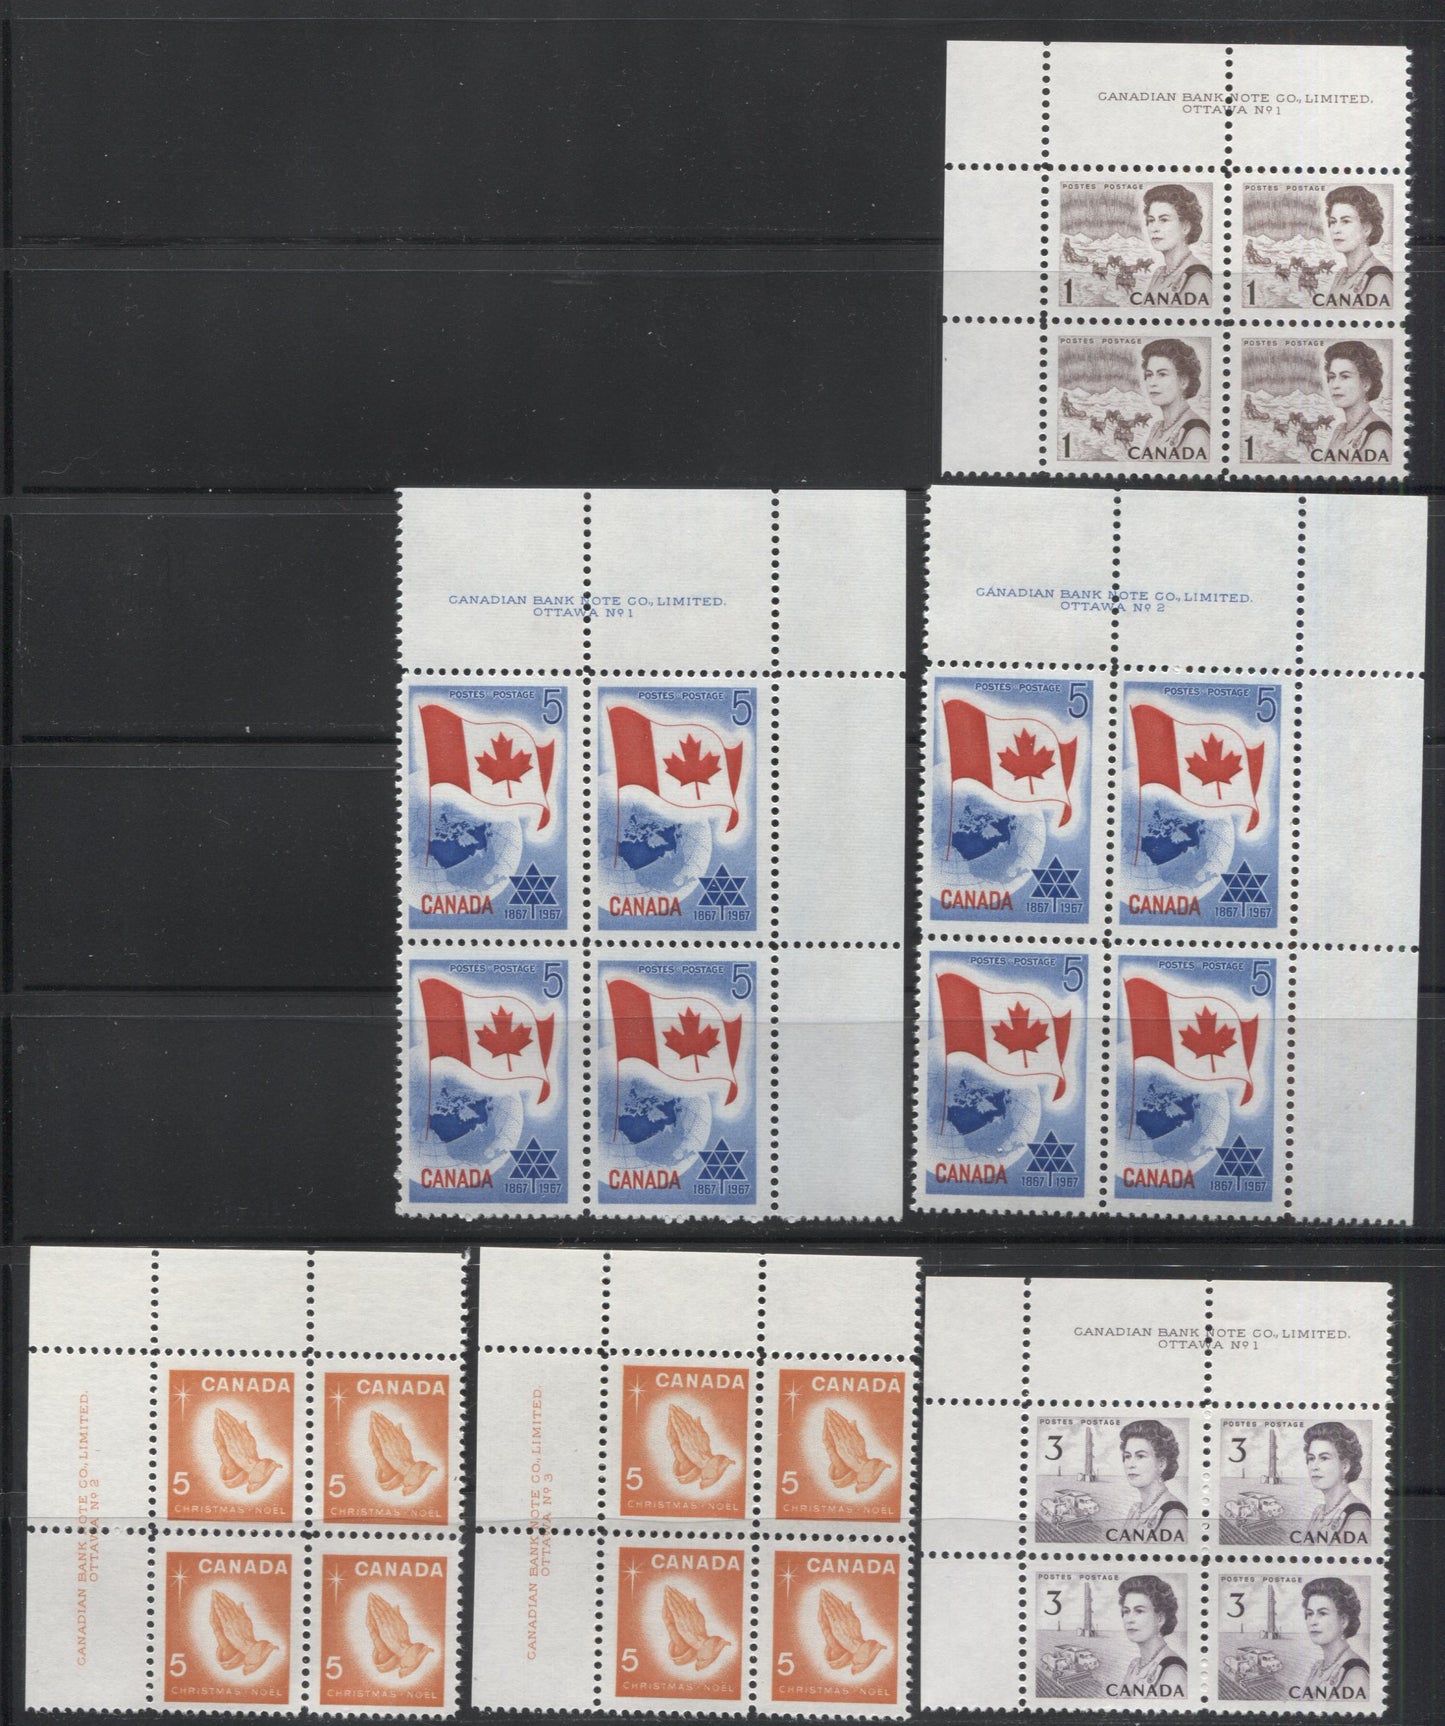 Lot 43 Canada #452-456 1c - 5c Brown - Blue & Red Queen Elizabeth II - Flag & Earth, 1966-1973 Commemoratives & Definitives, 9 VFNH UL and UR Plates 1-3 Blocks Of 4, 454 Plate 2 is on NF Paper